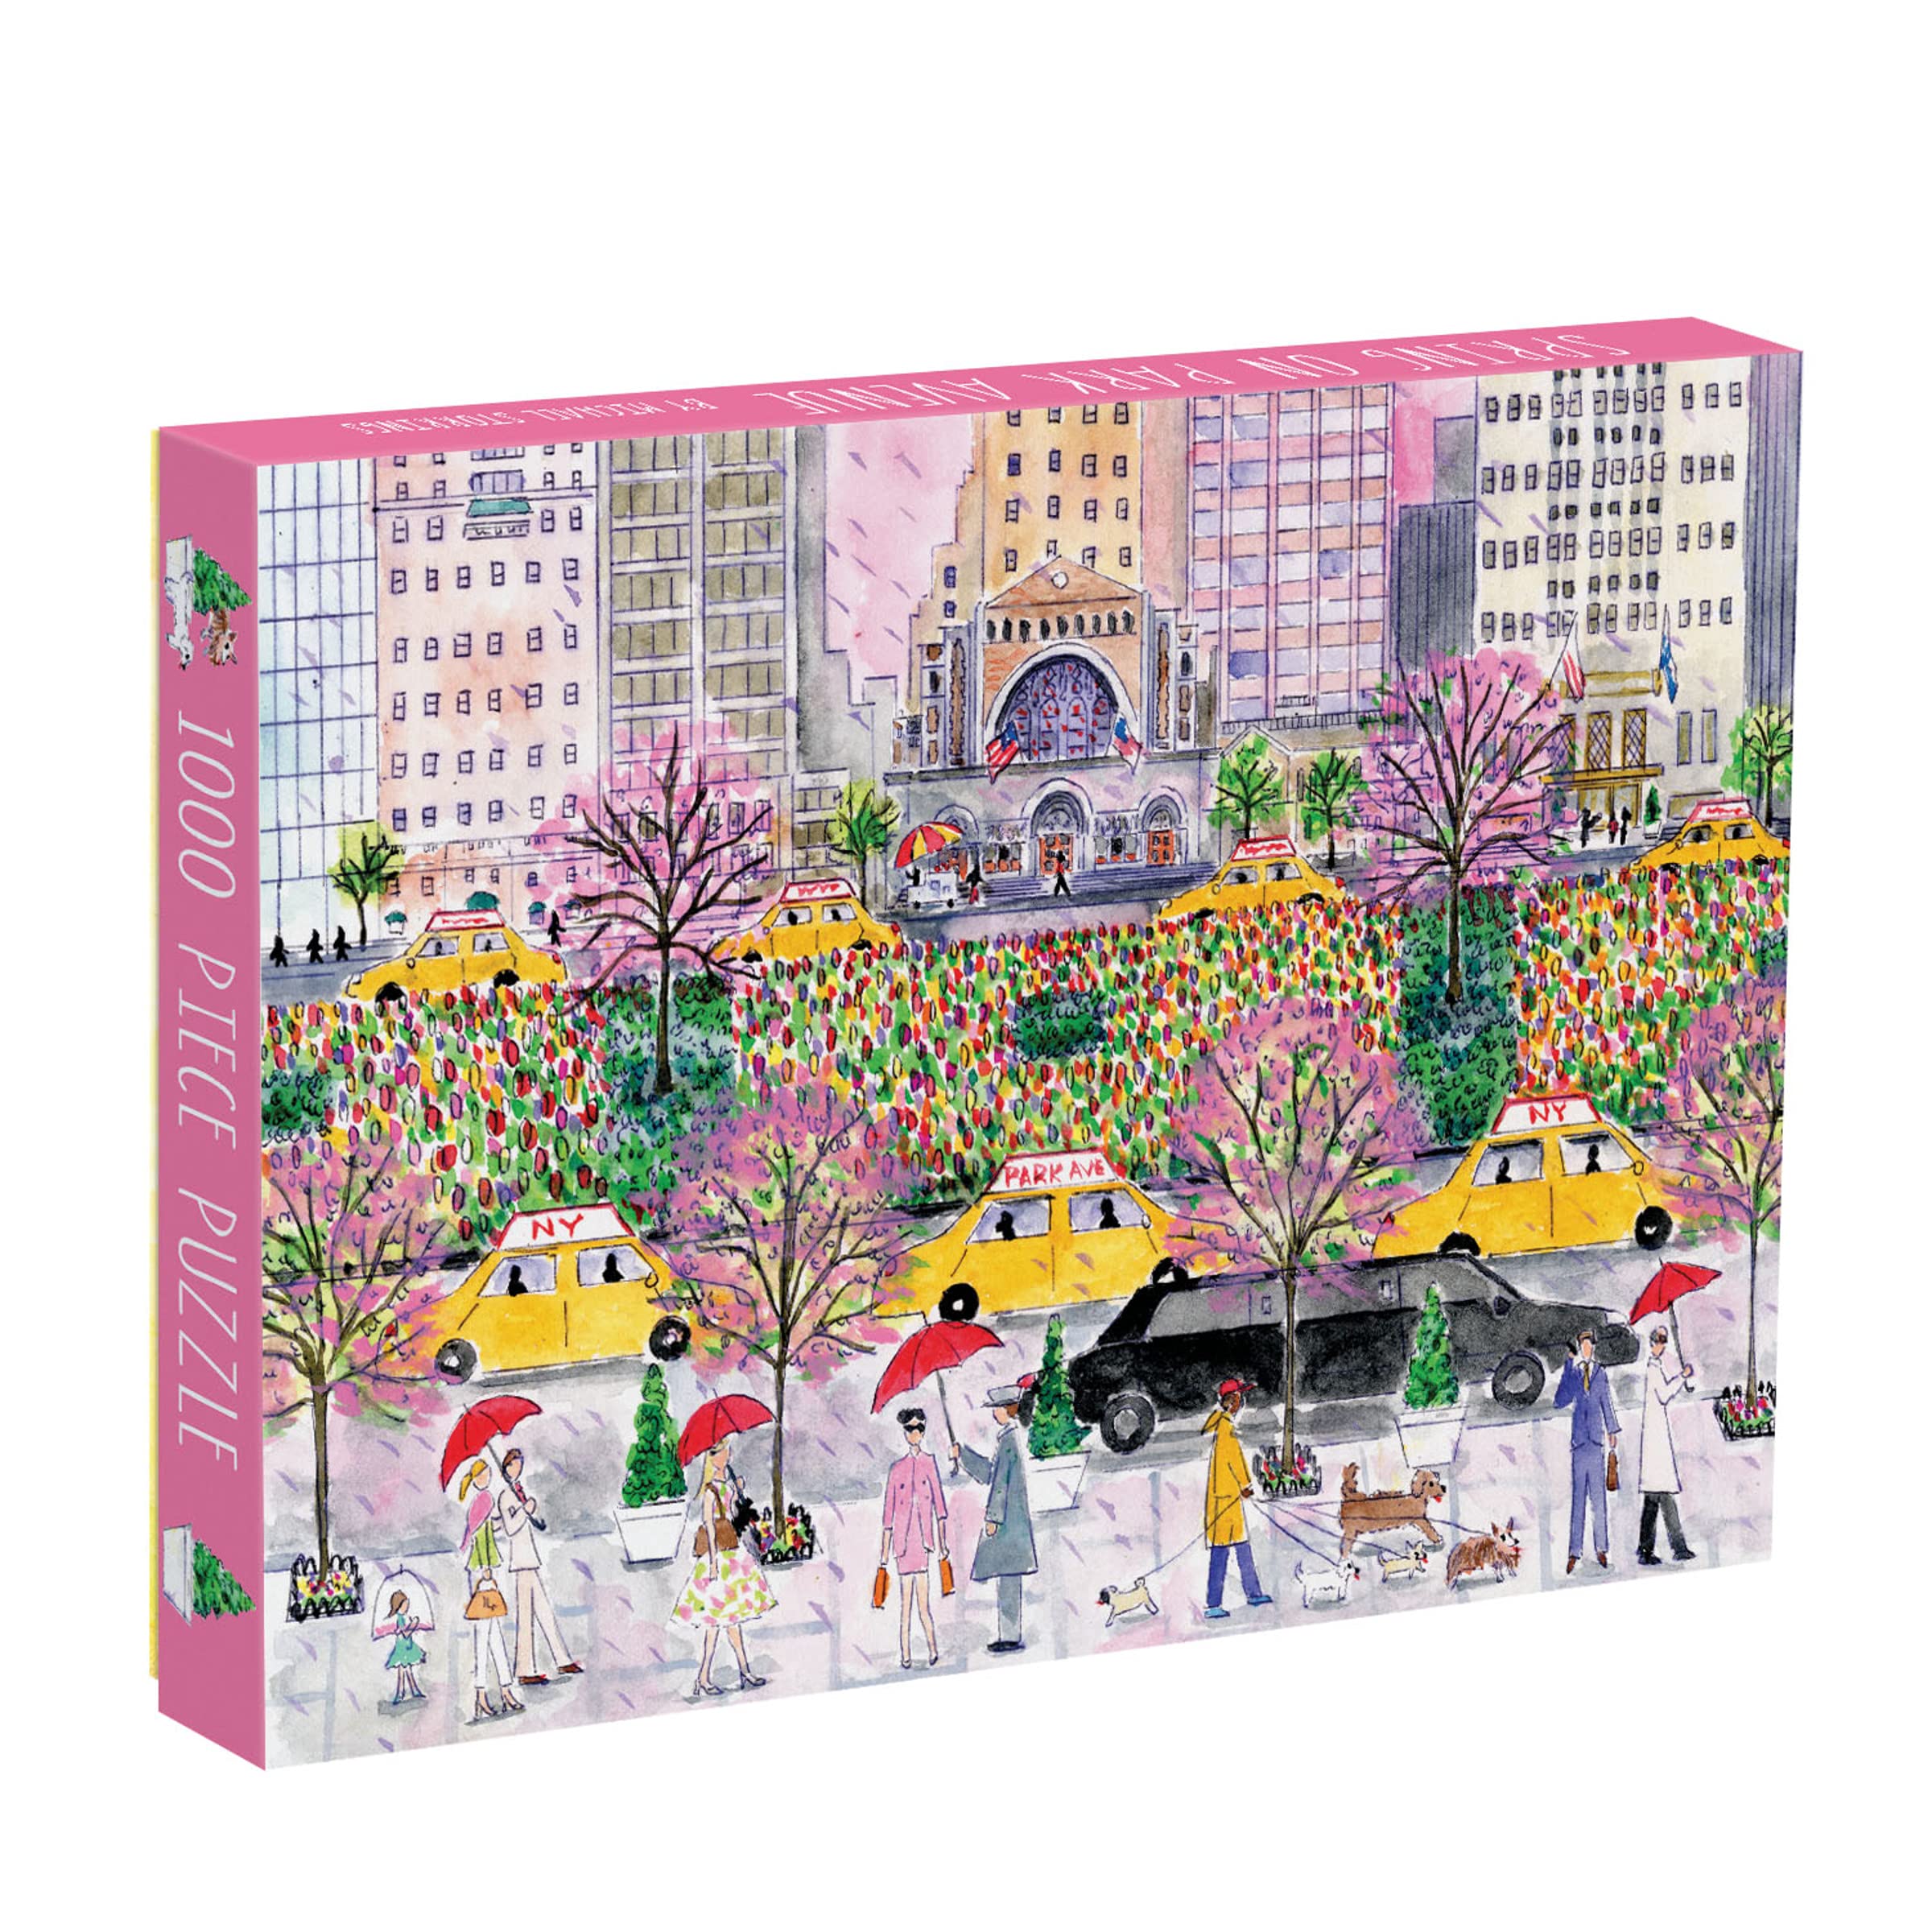 Galison Michael Storrings 1000 Piece Spring on Park Avenue New York City Jigsaw Puzzle for Adults, Vibrant Challenging Puzzle with NYC's famed Park Avenue Scene